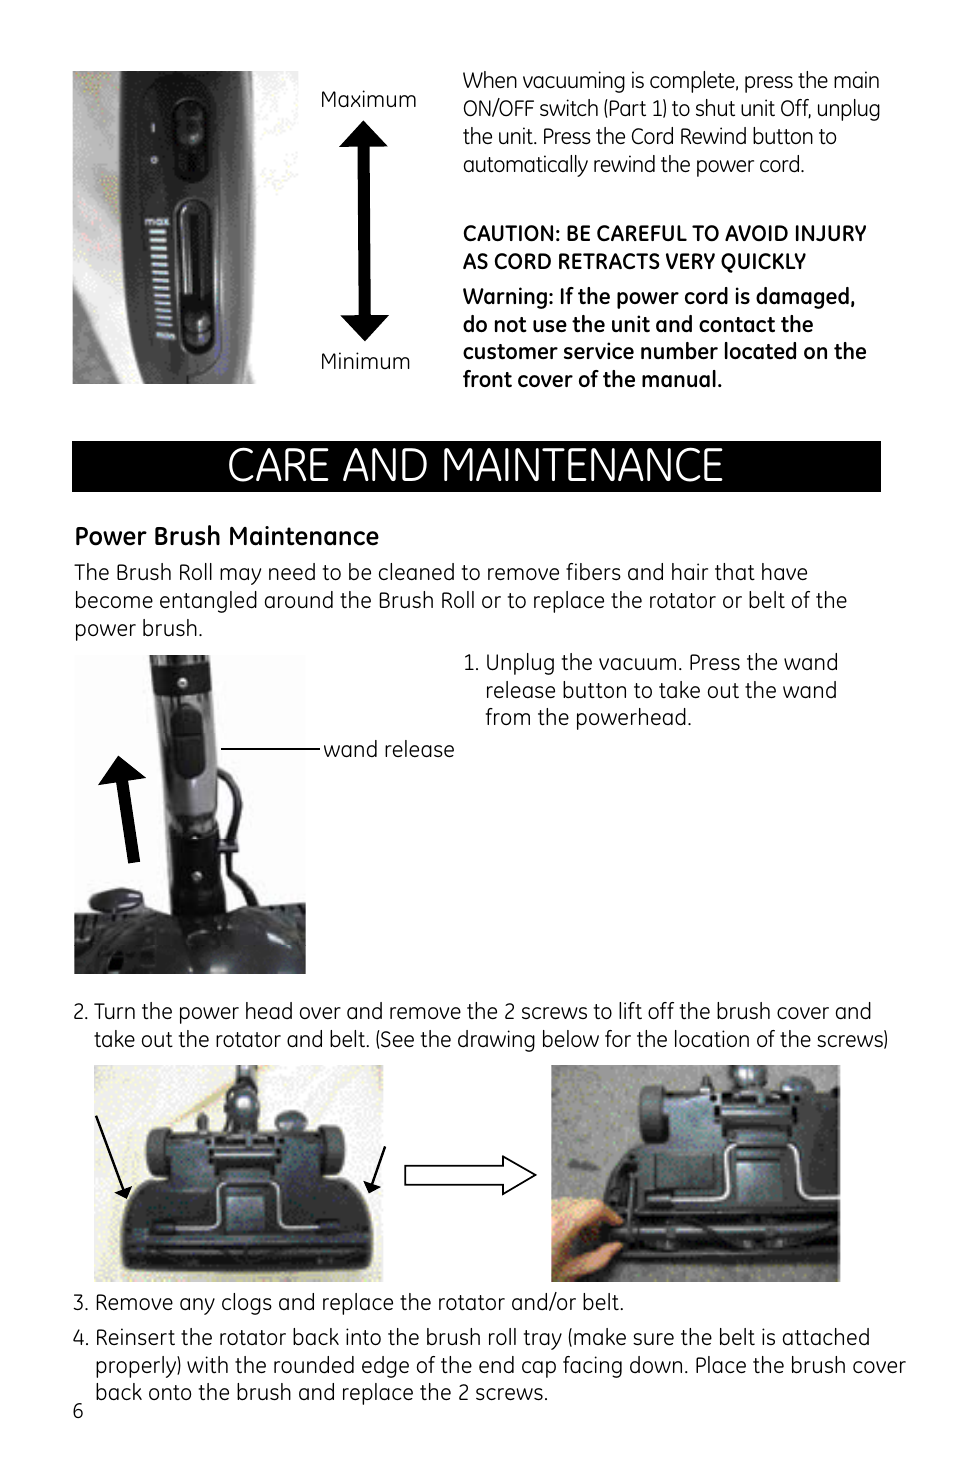 Care and maintenance | GE 169072 User Manual | Page 6 / 10